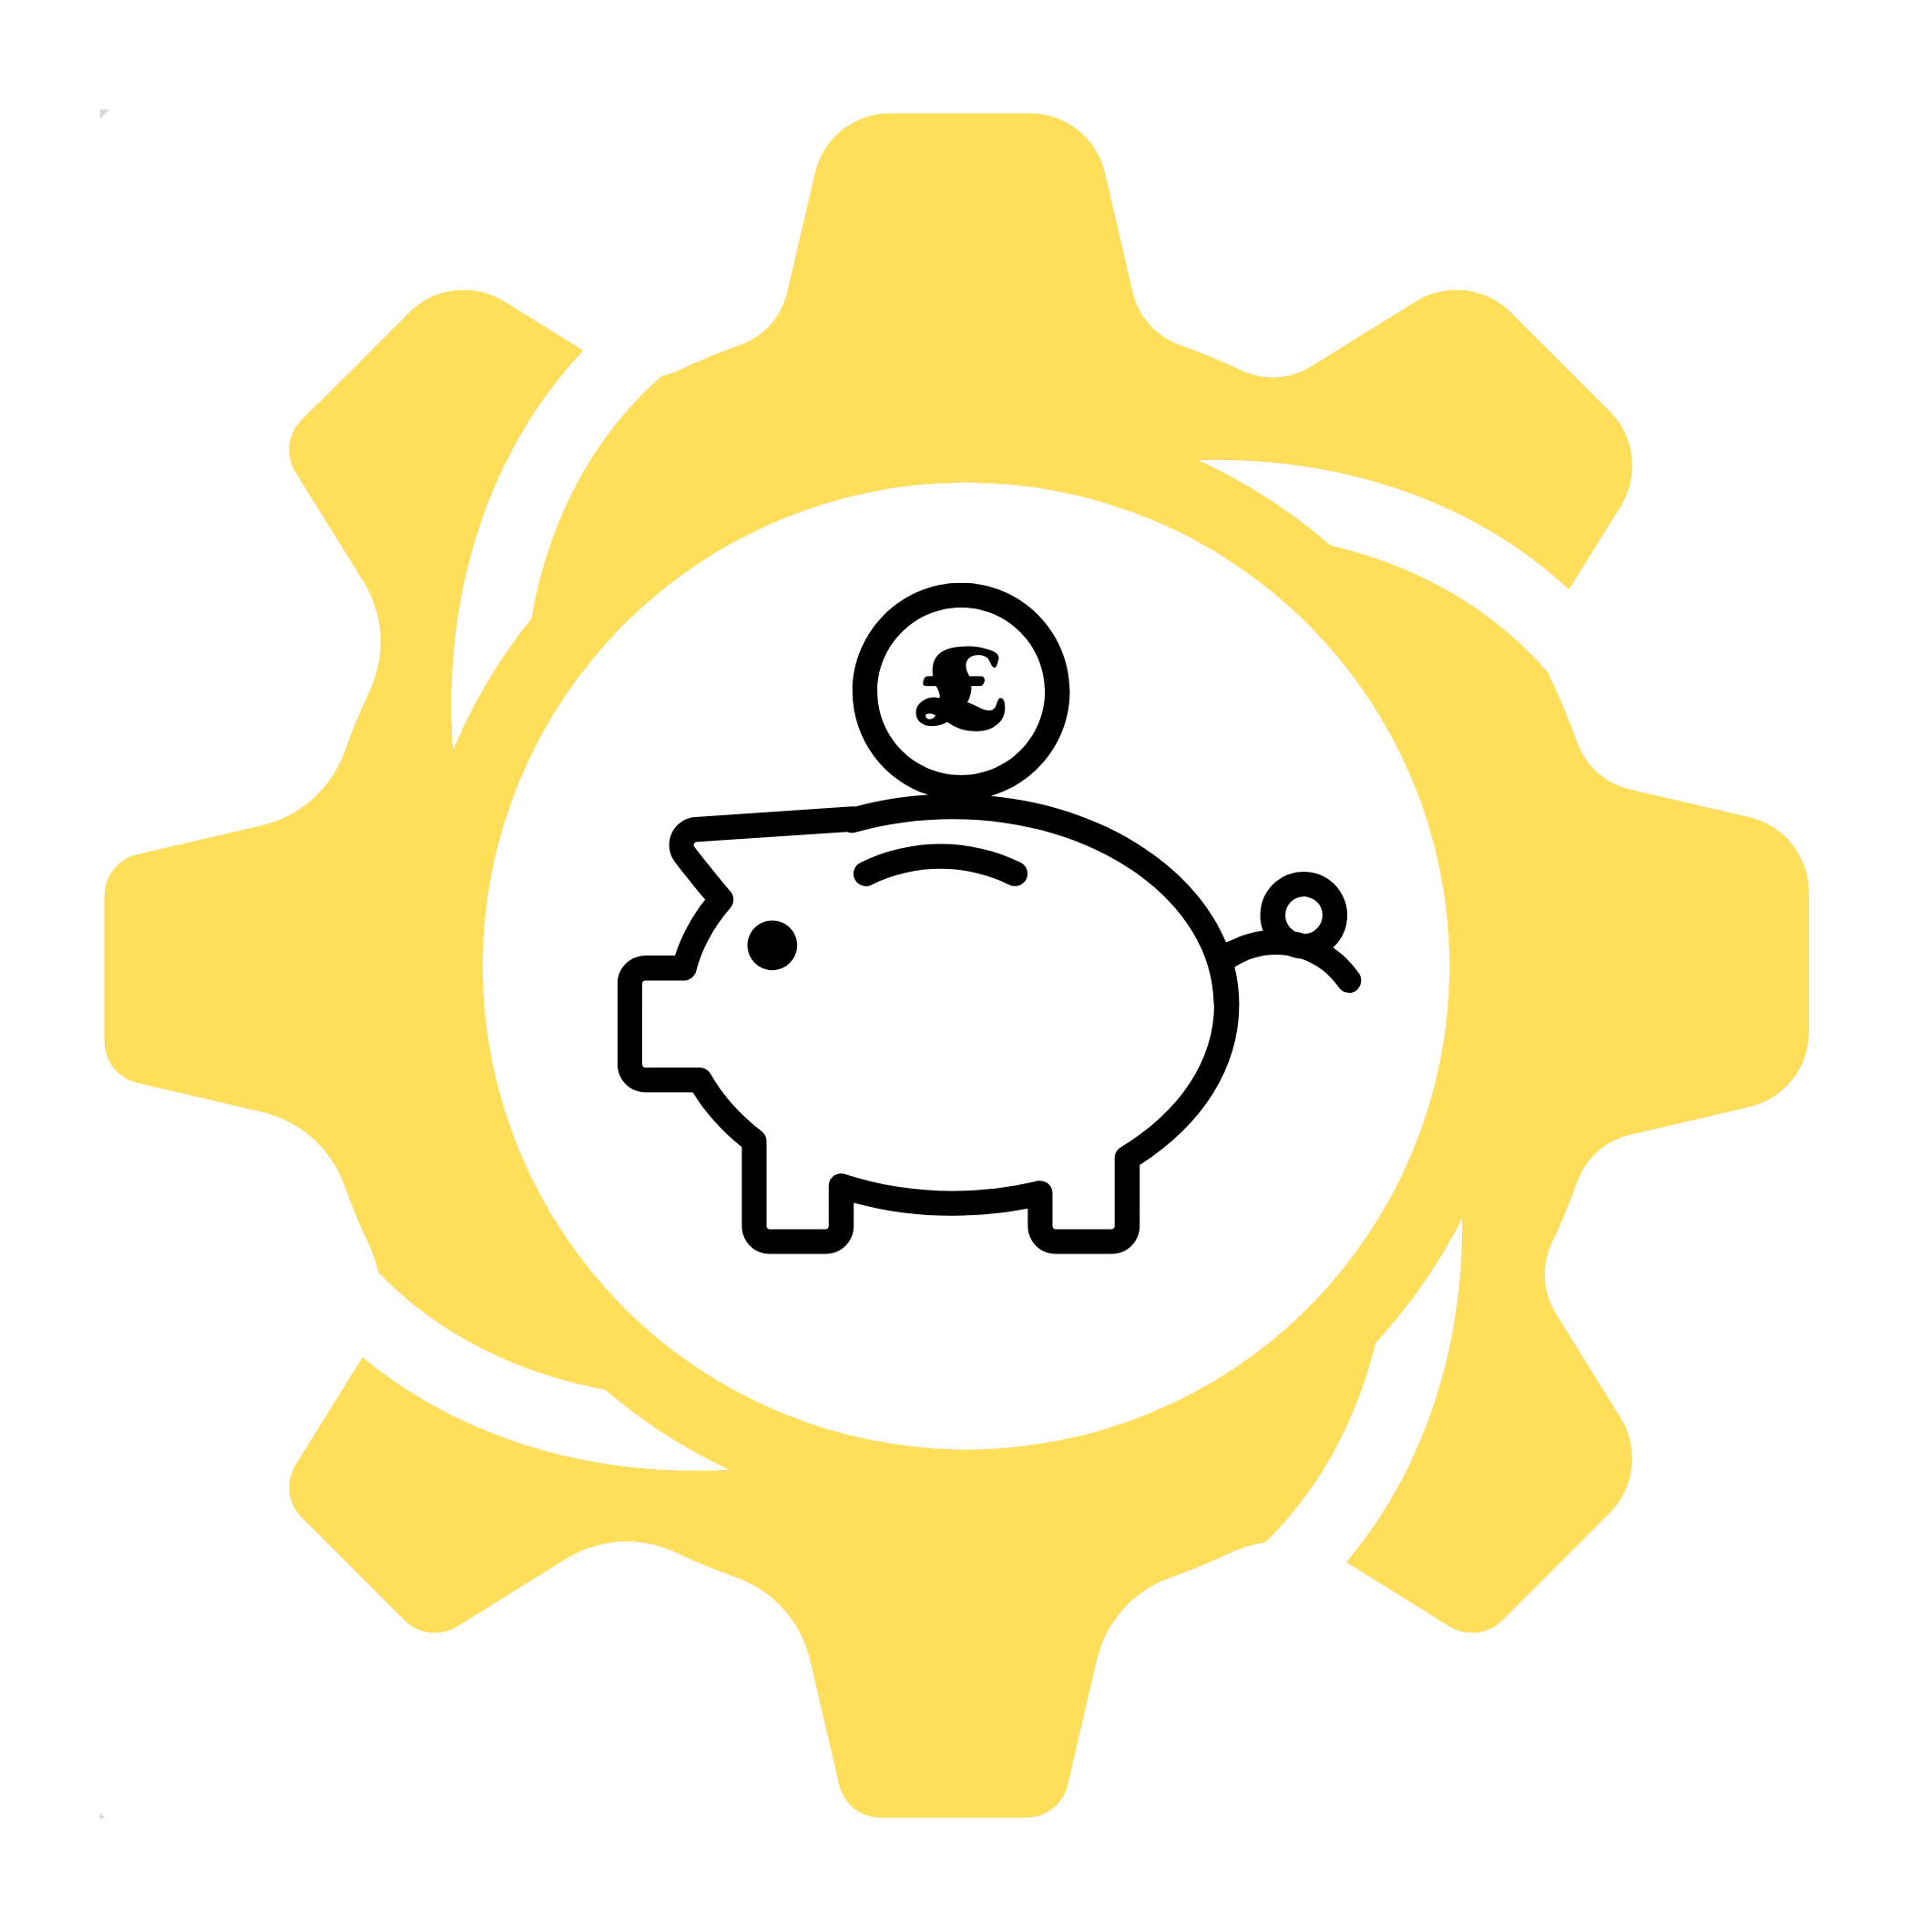 New style cog icon with image of a piggy bank linking to the donate page.